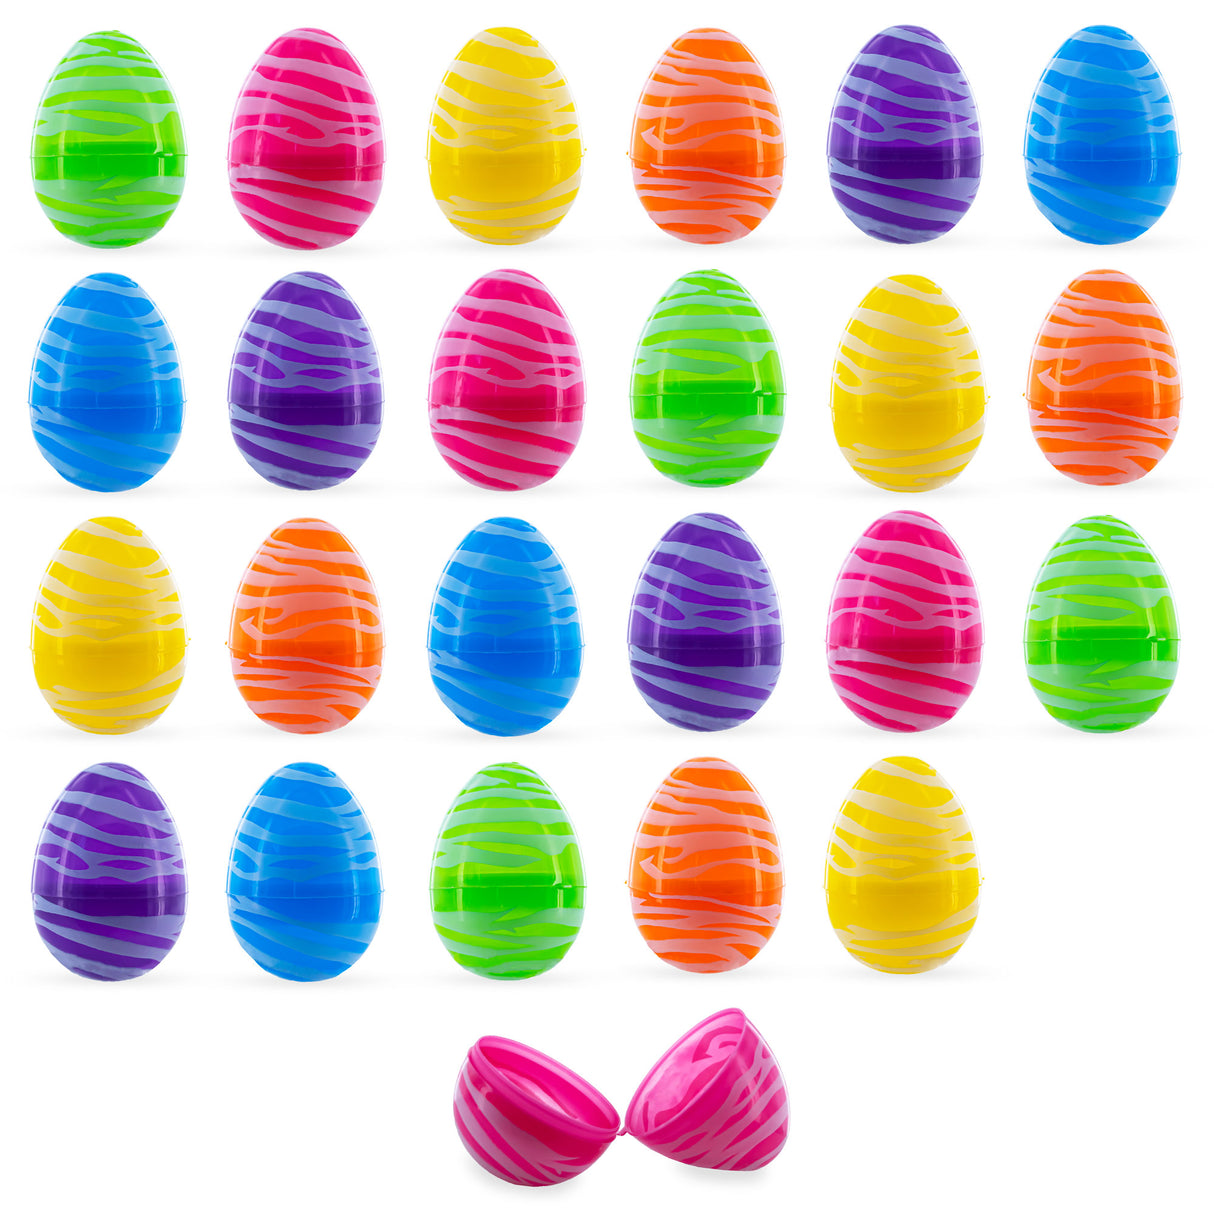 Circular Delights: Set of 24 Colorful Circle Printed Fillable Plastic Easter Eggs 2.25 Inches in Multi color, Oval shape